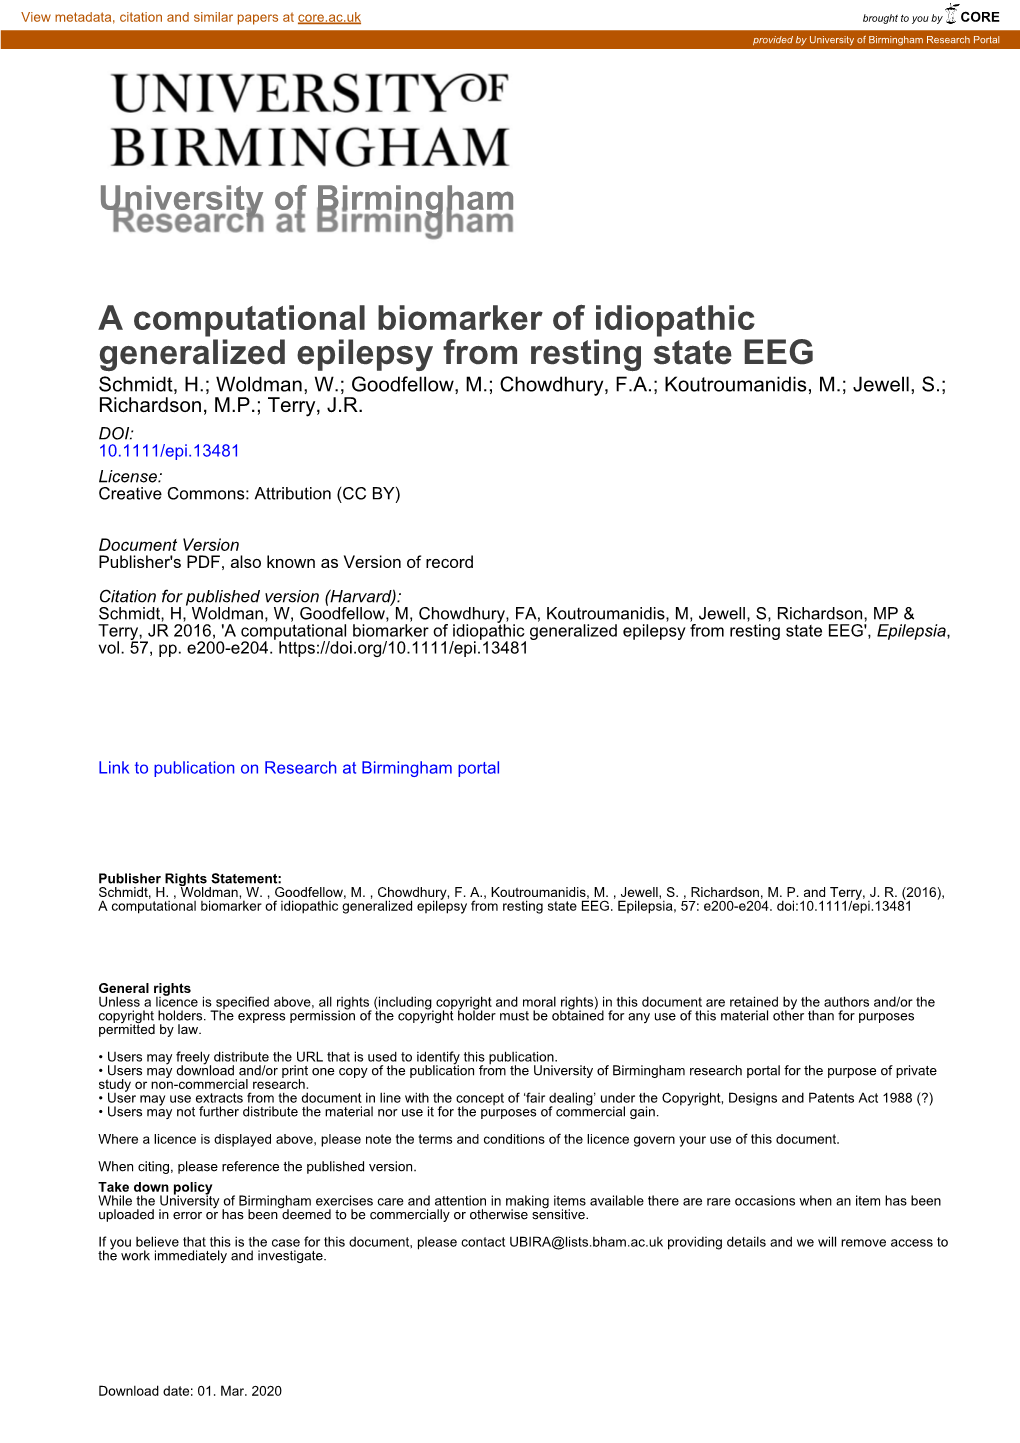 A Computational Biomarker of Idiopathic Generalized